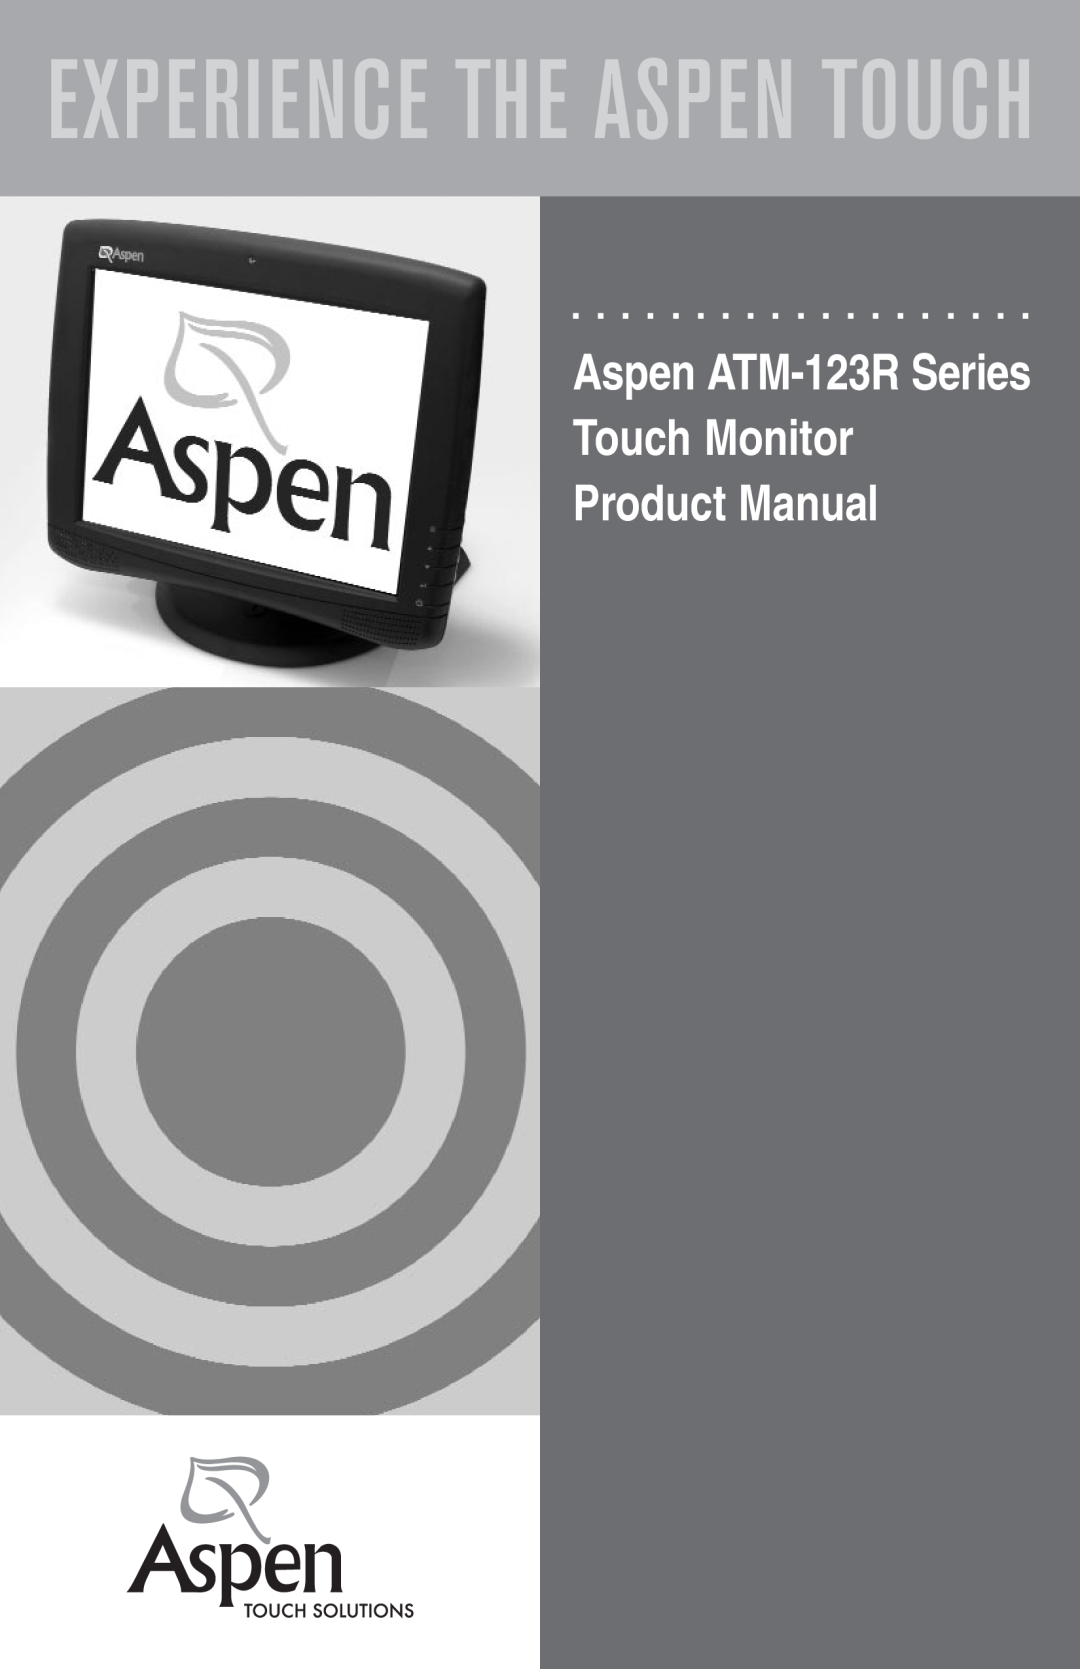 Aspen Touch Solutions ATM-123R Series manual Experience The Aspen Touch, Touch Monitor Product Manual 